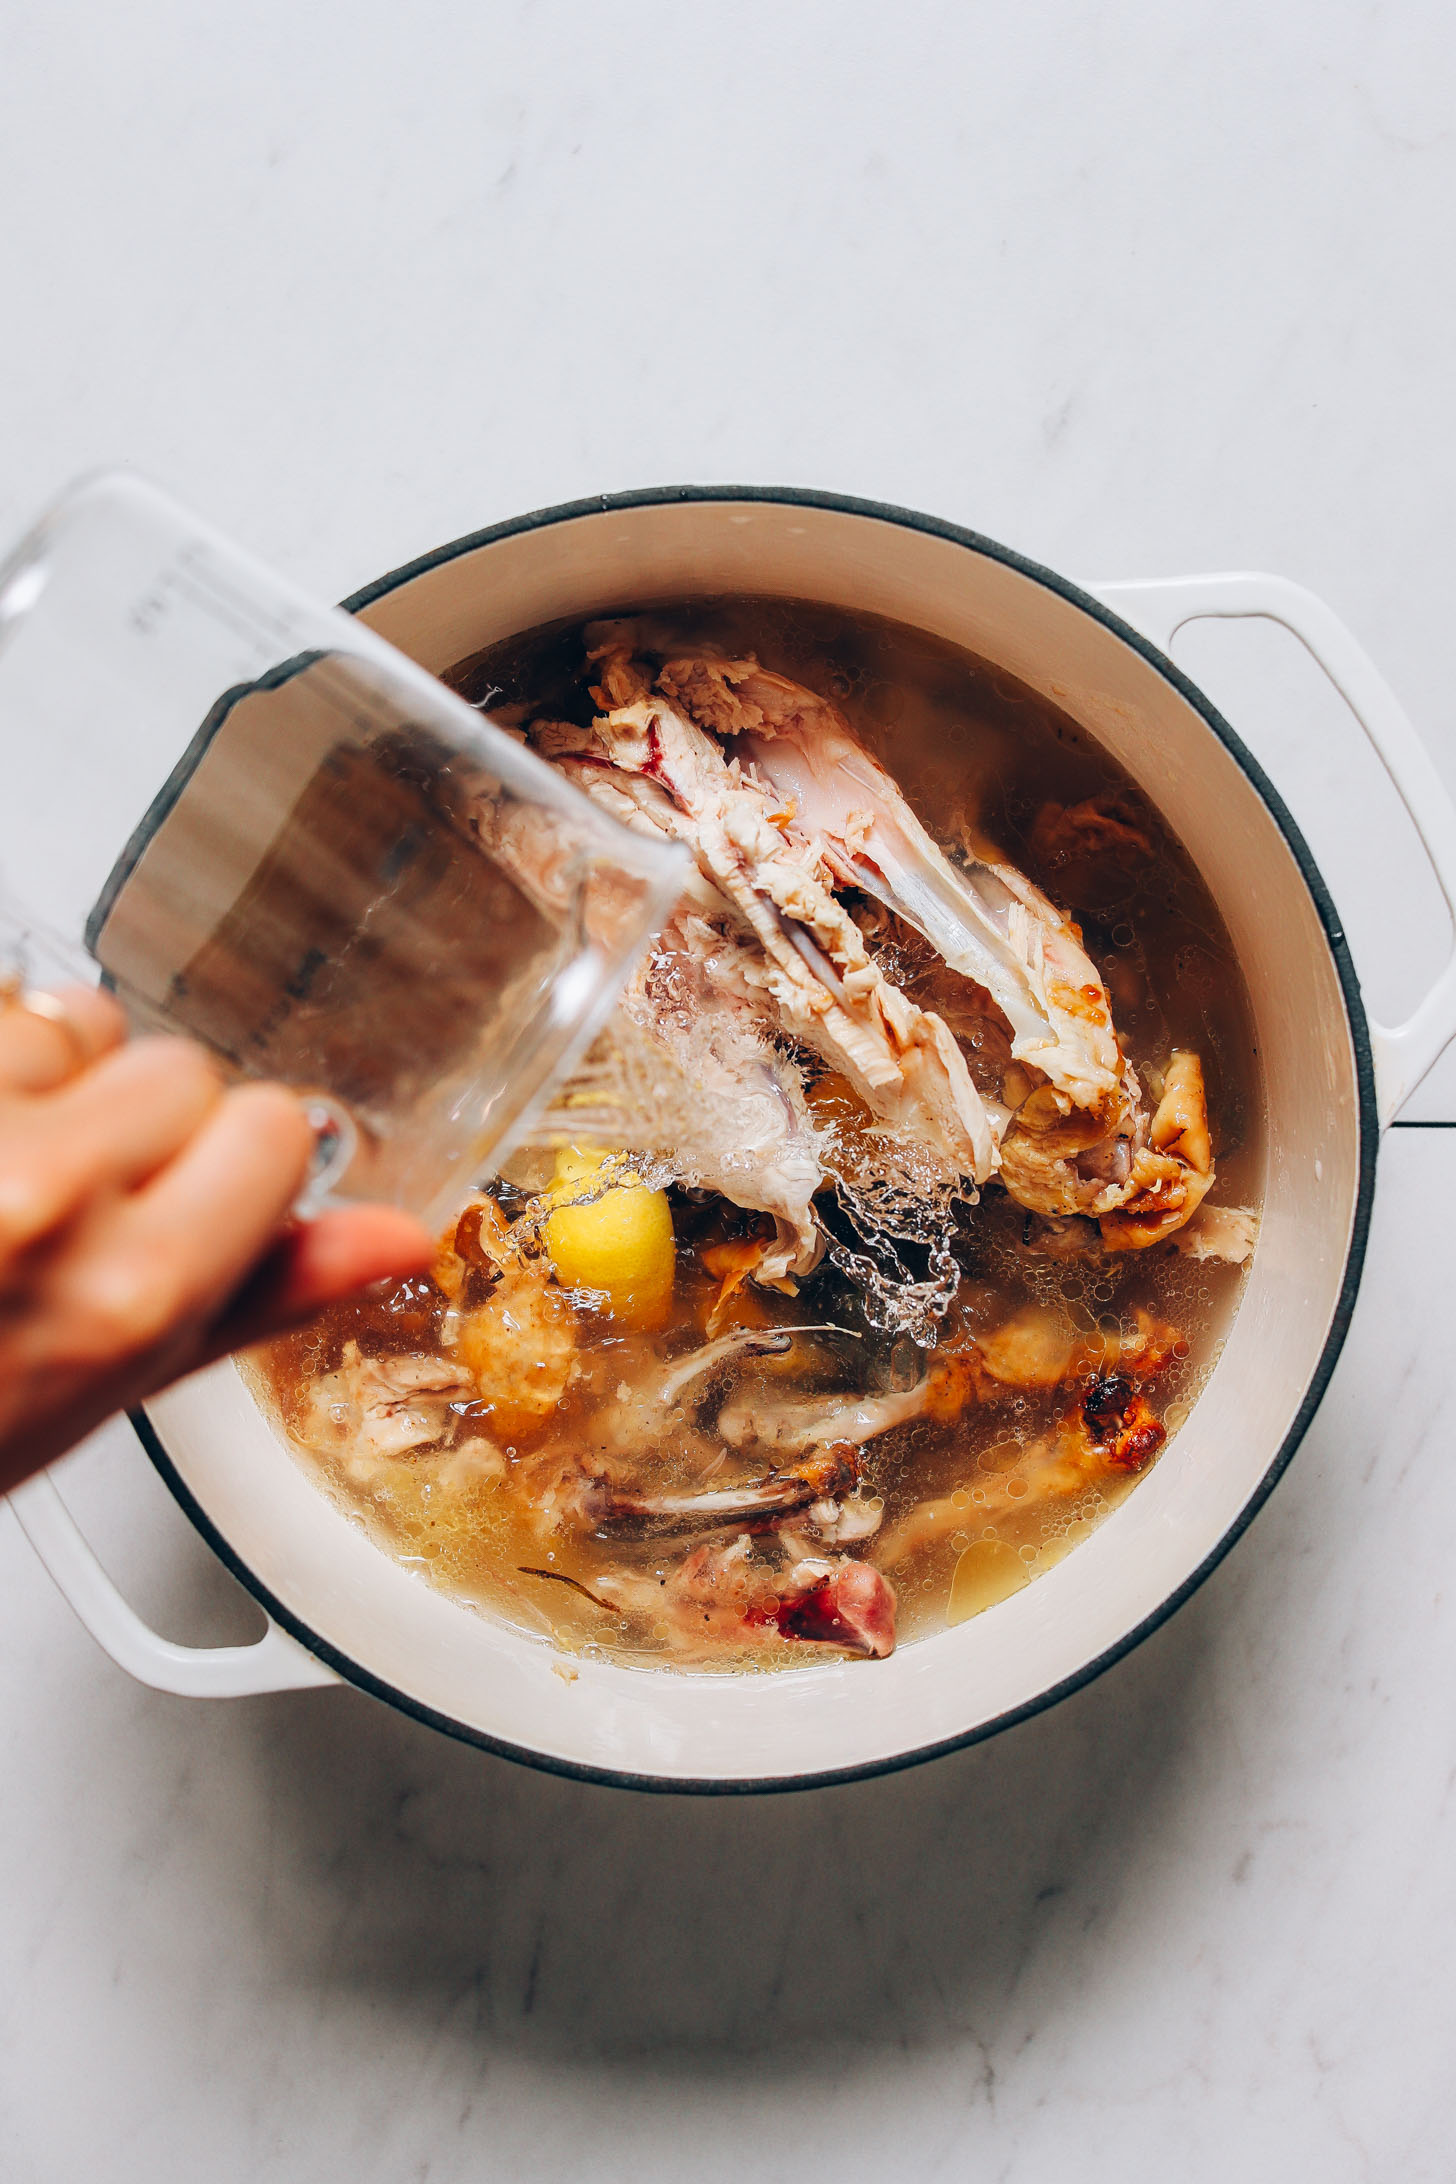 Pouring water over a chicken carcass for our tutorial on How to Make Bone Broth